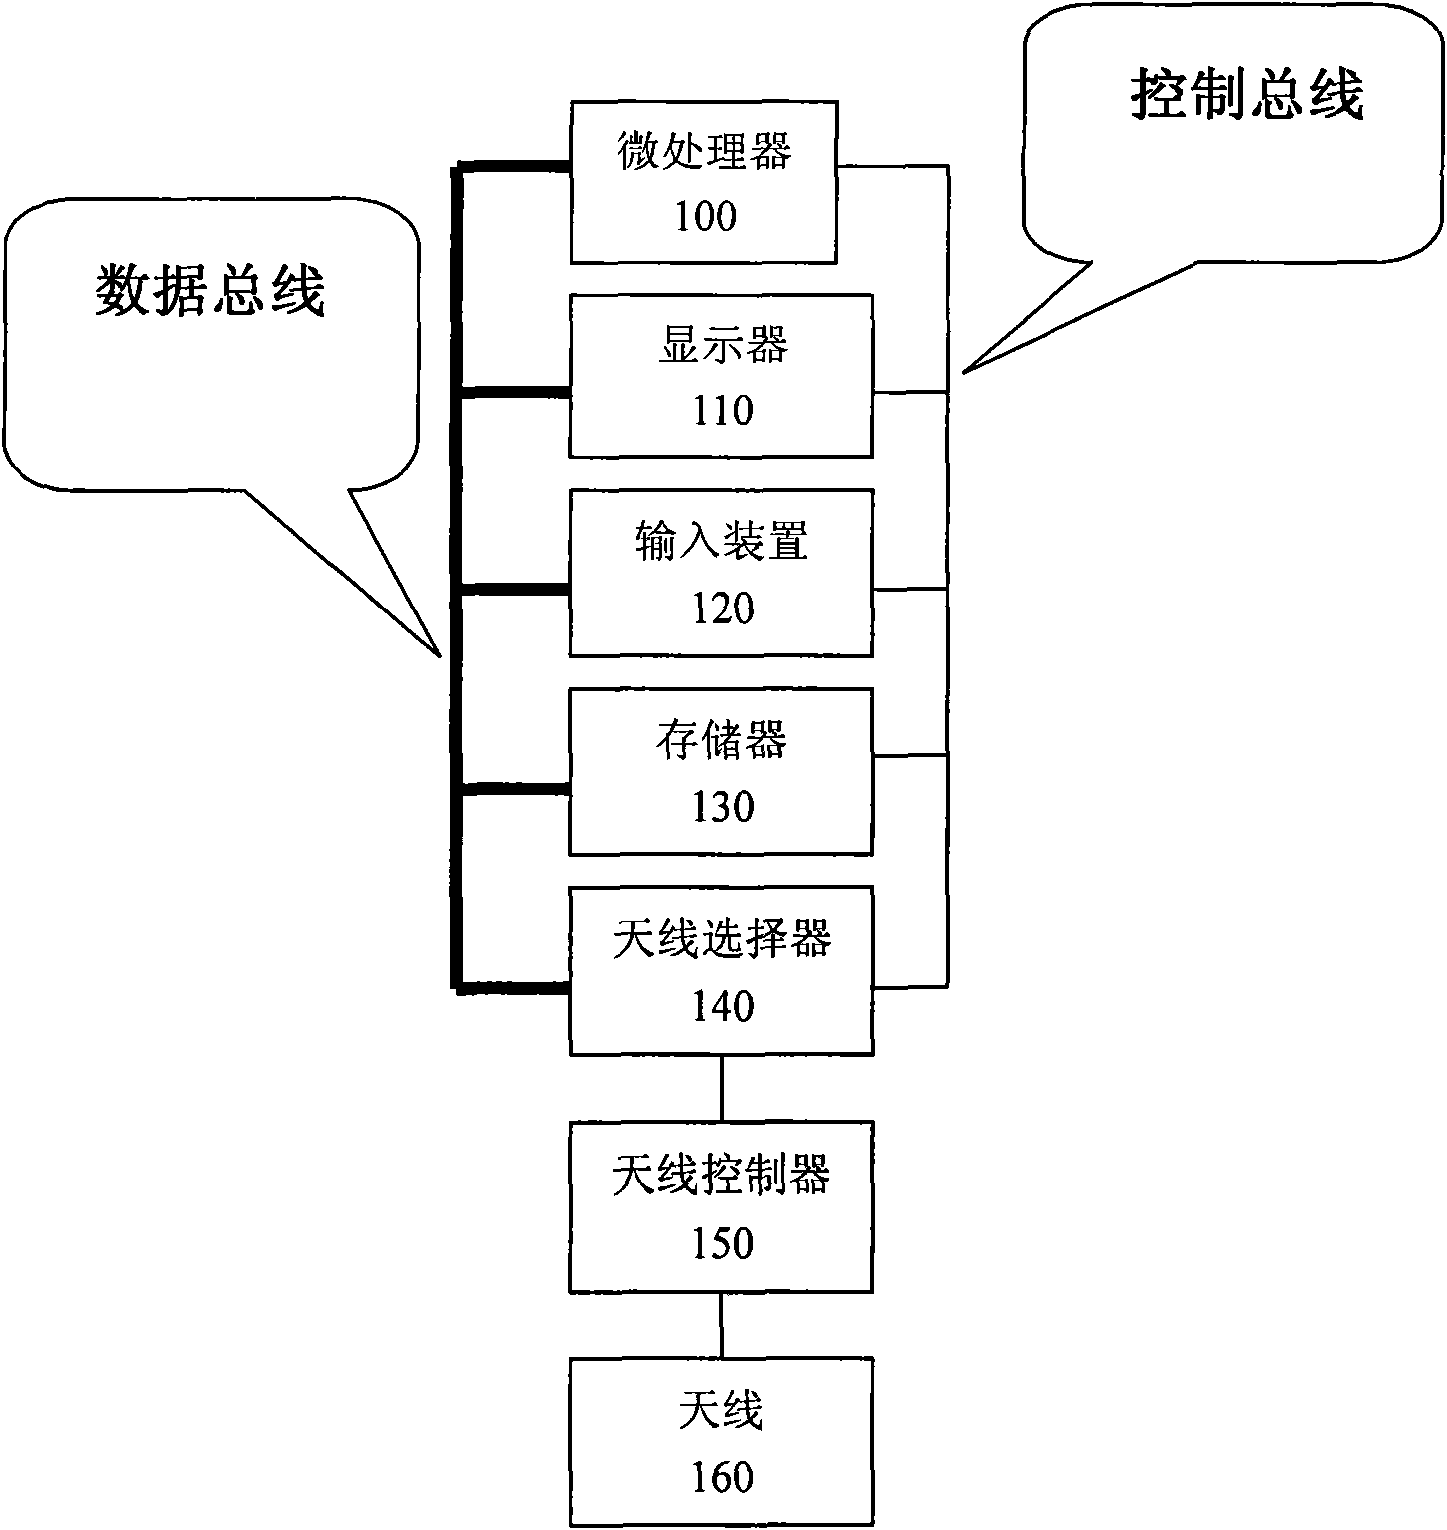 Electronic payment device for personal use